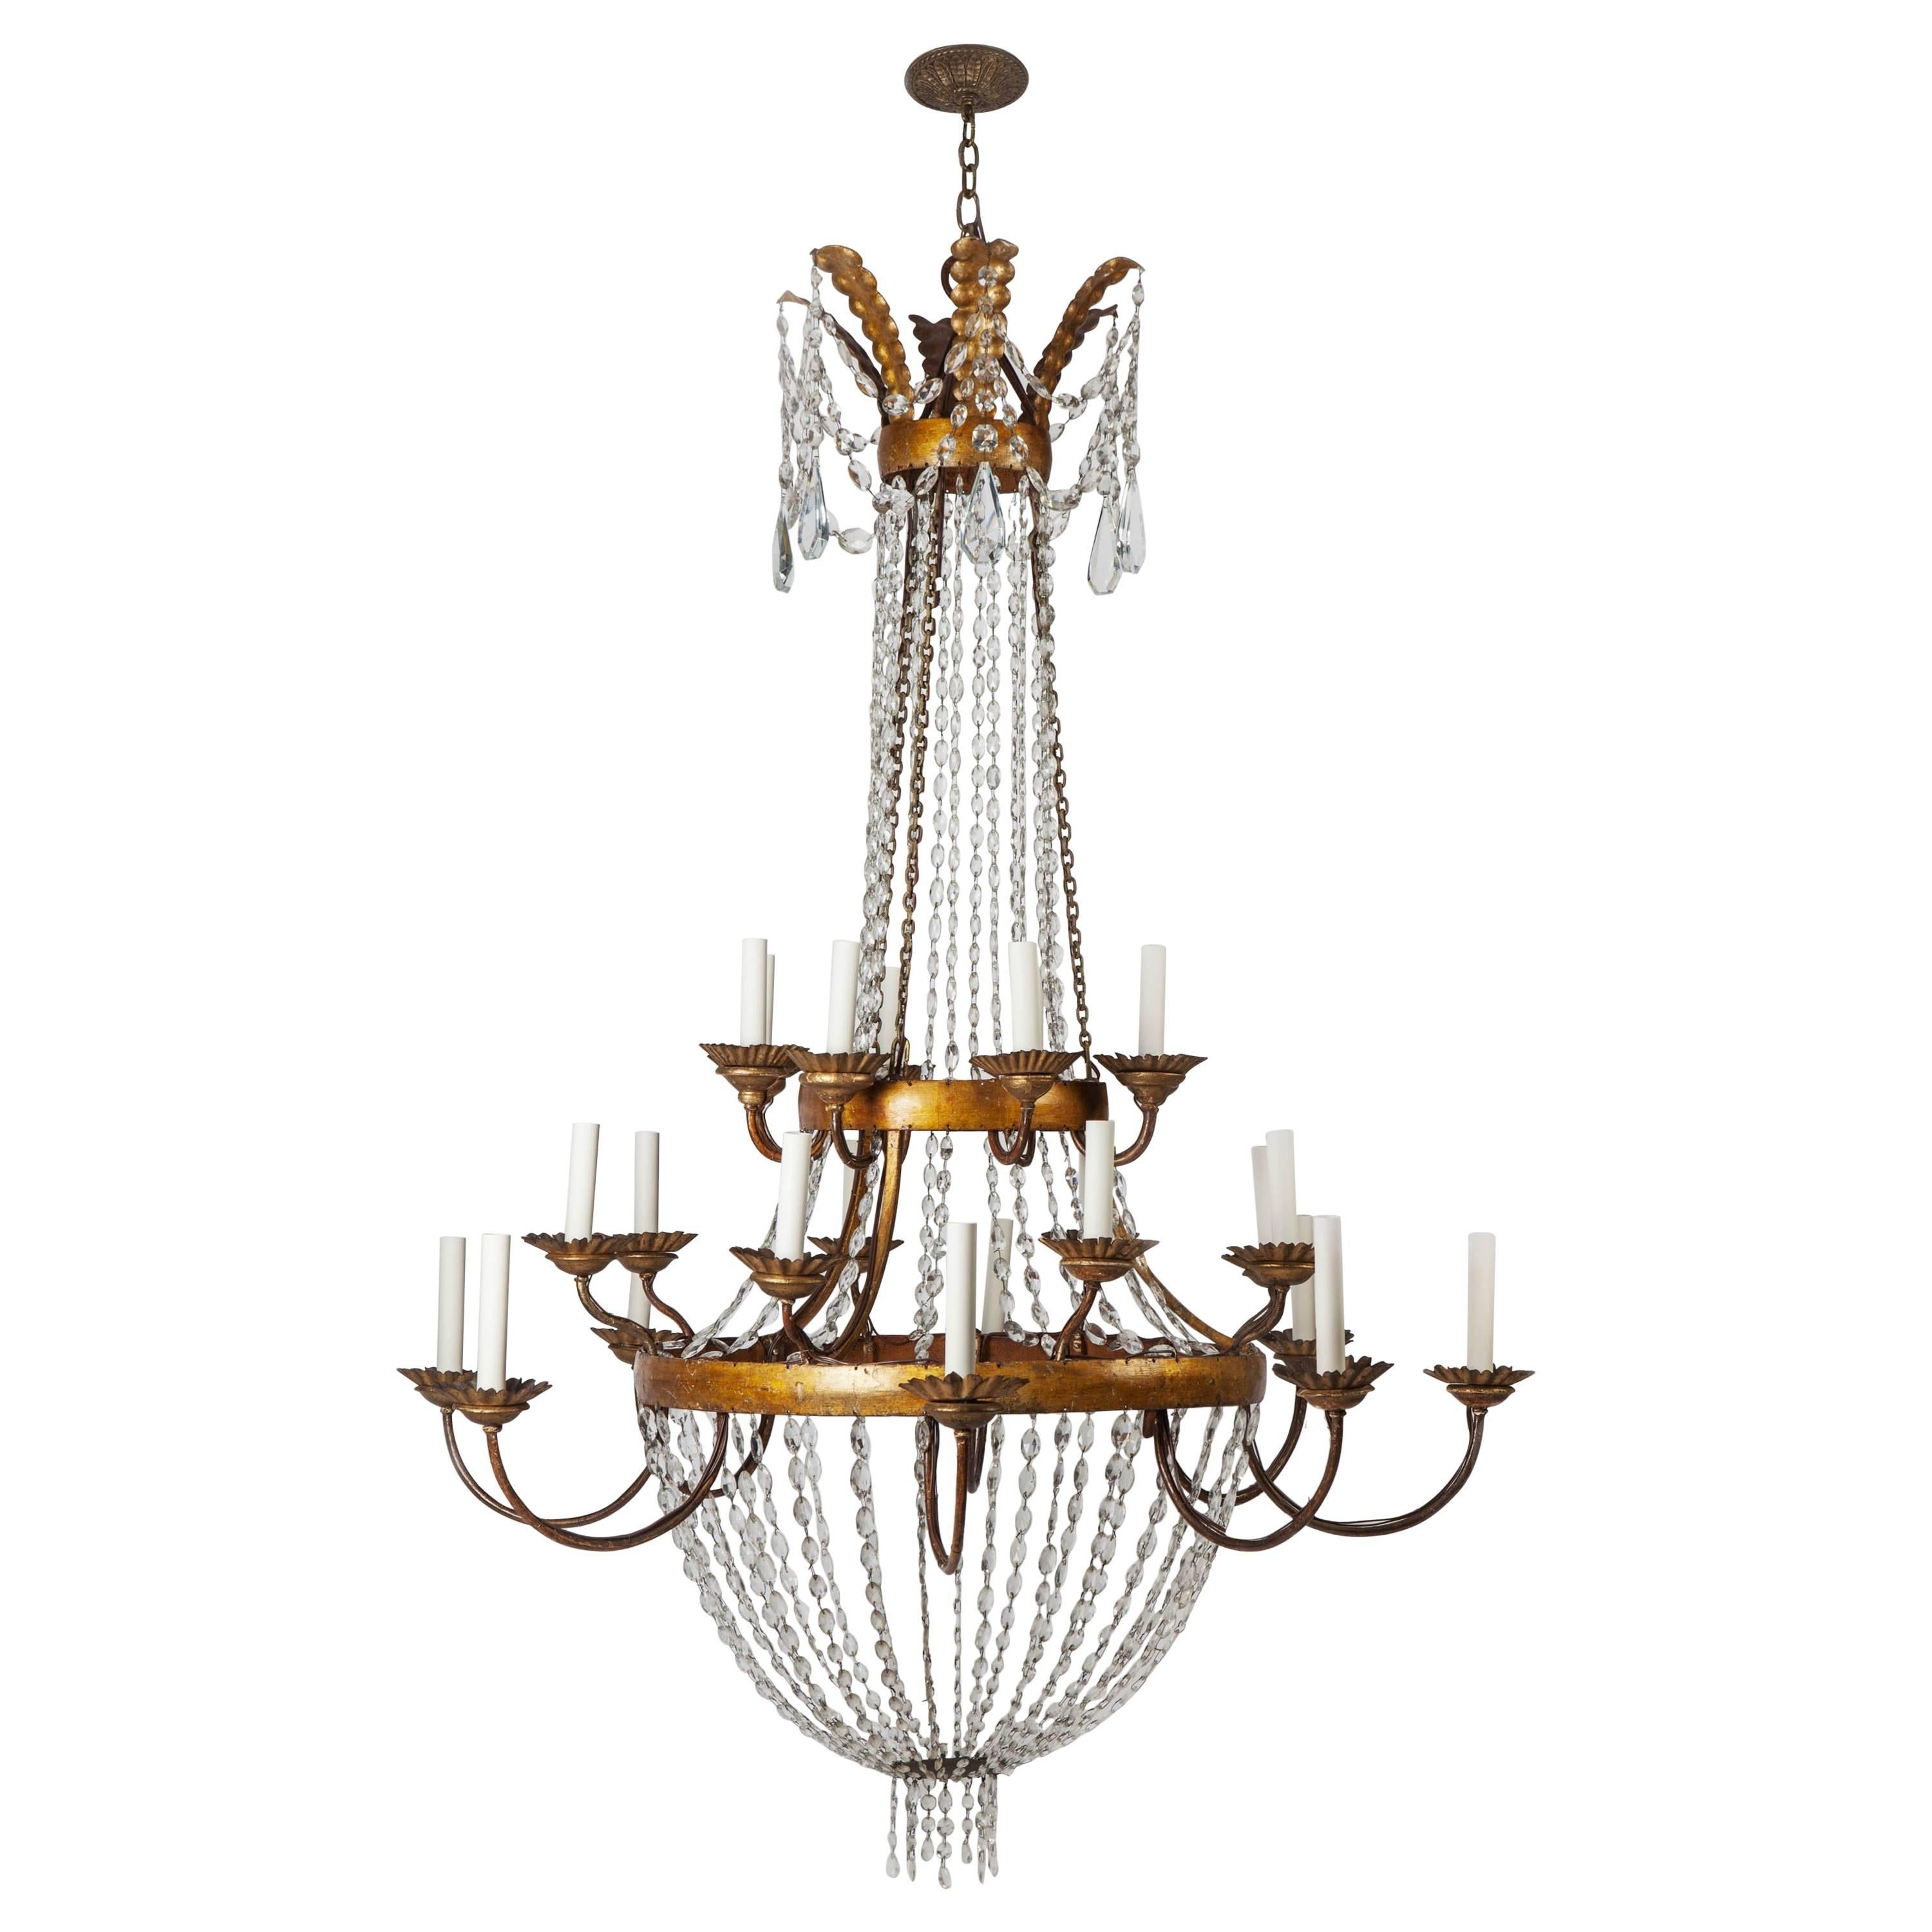 Gilded Iron and Crystal Chandelier